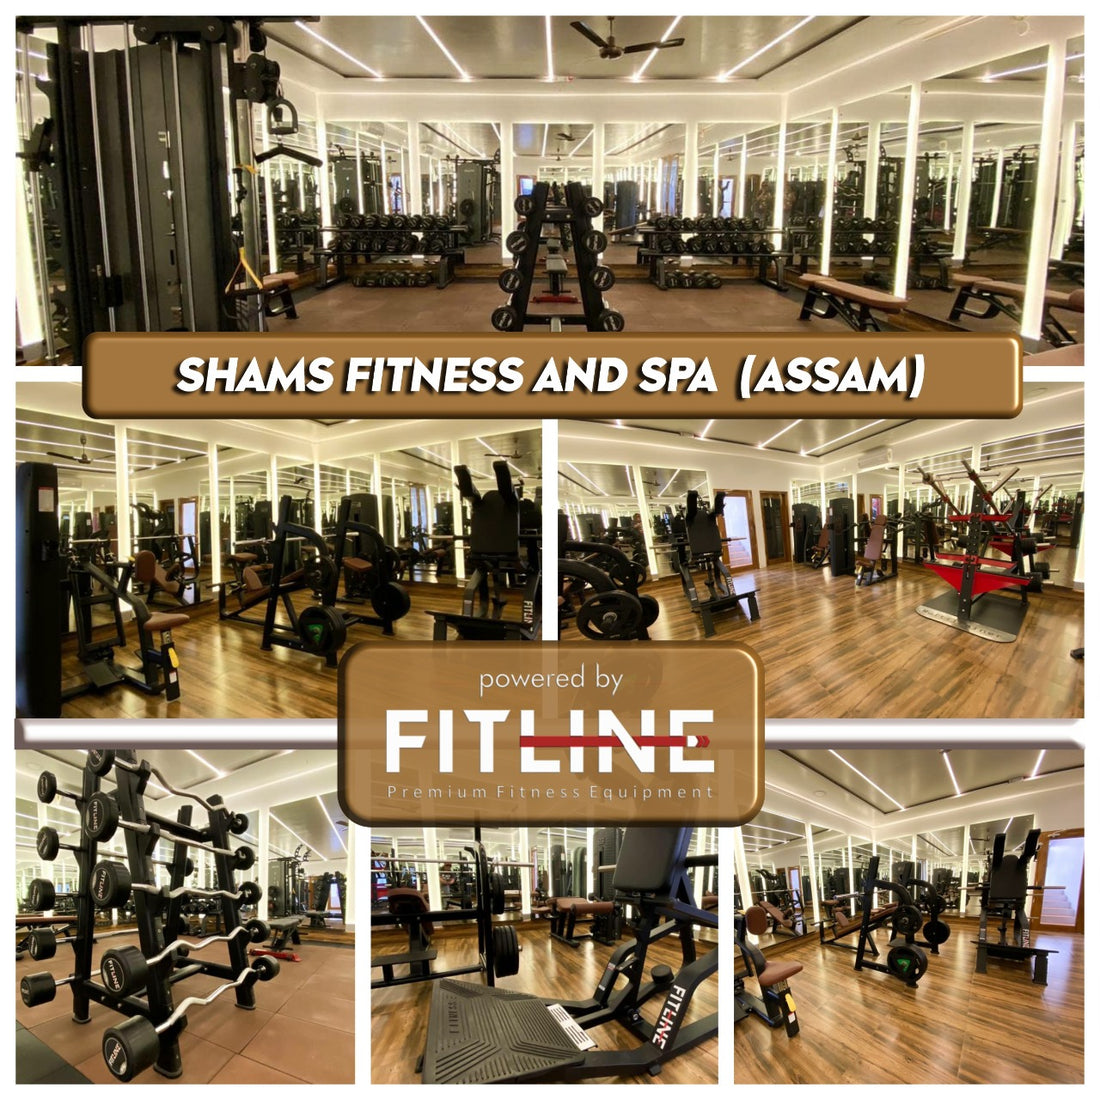 SHAMS FITNESS AND SPA